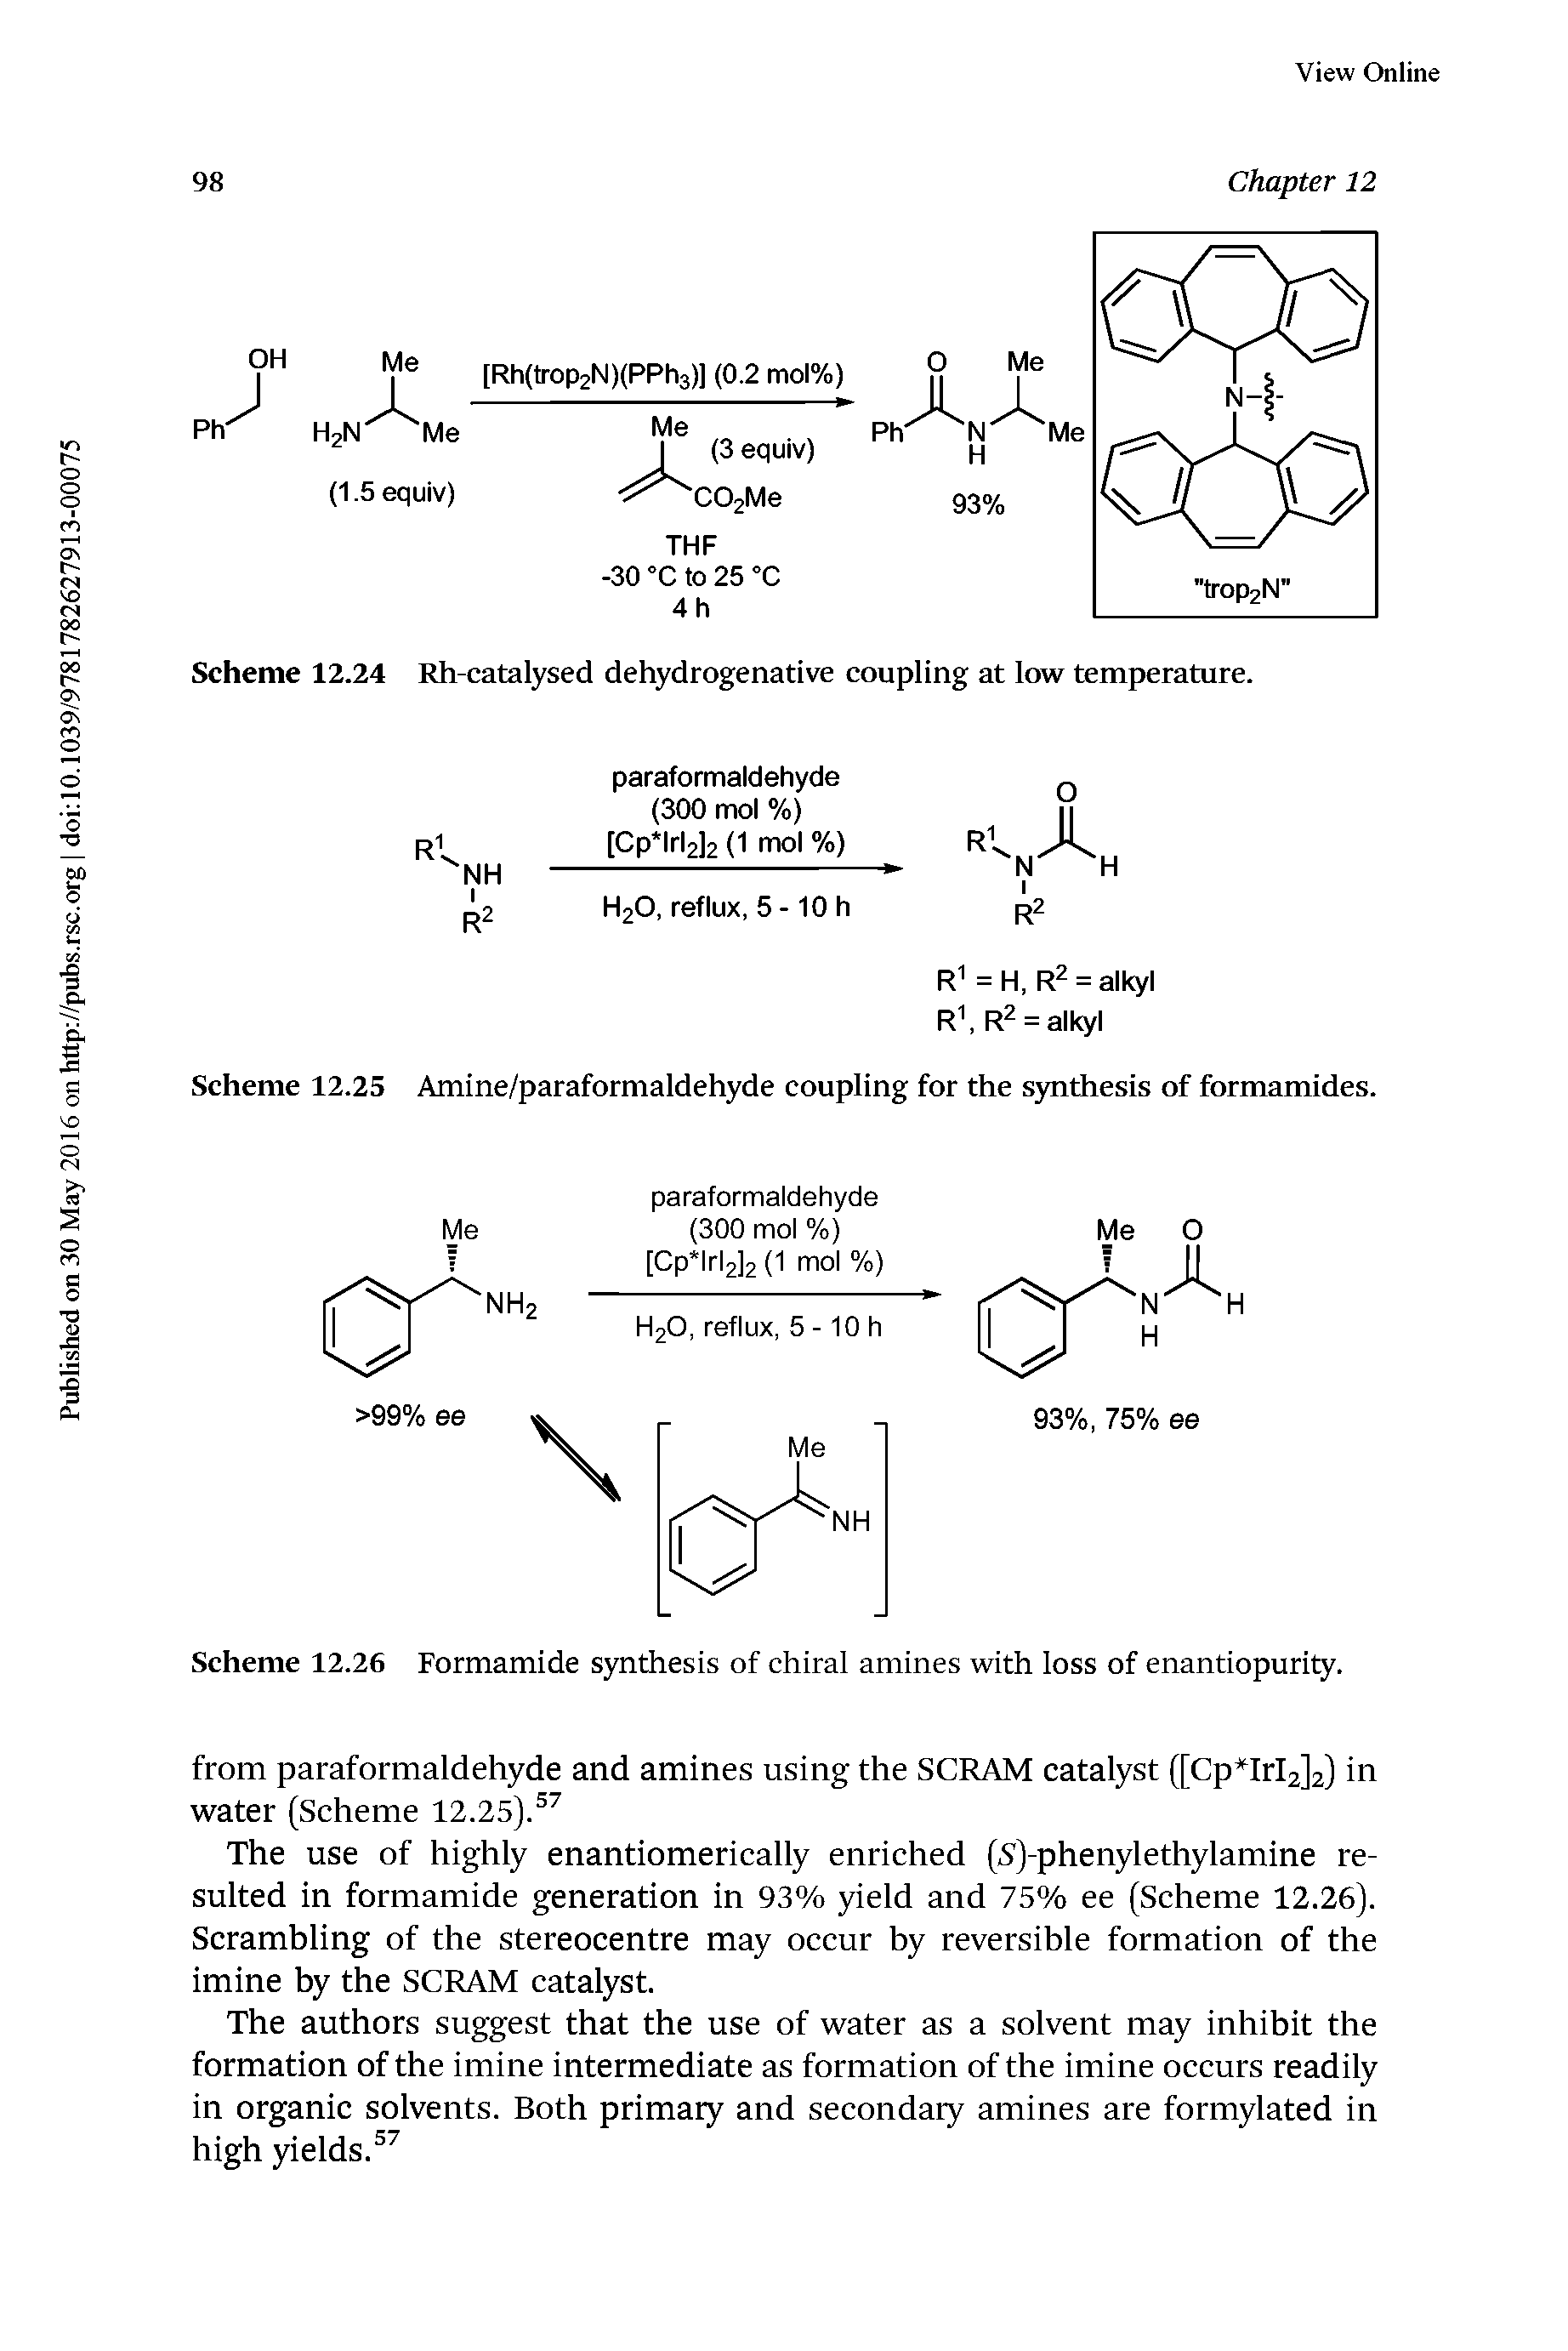 Scheme 12.26 Formamide synthesis of chiral amines with loss of enantiopurity.